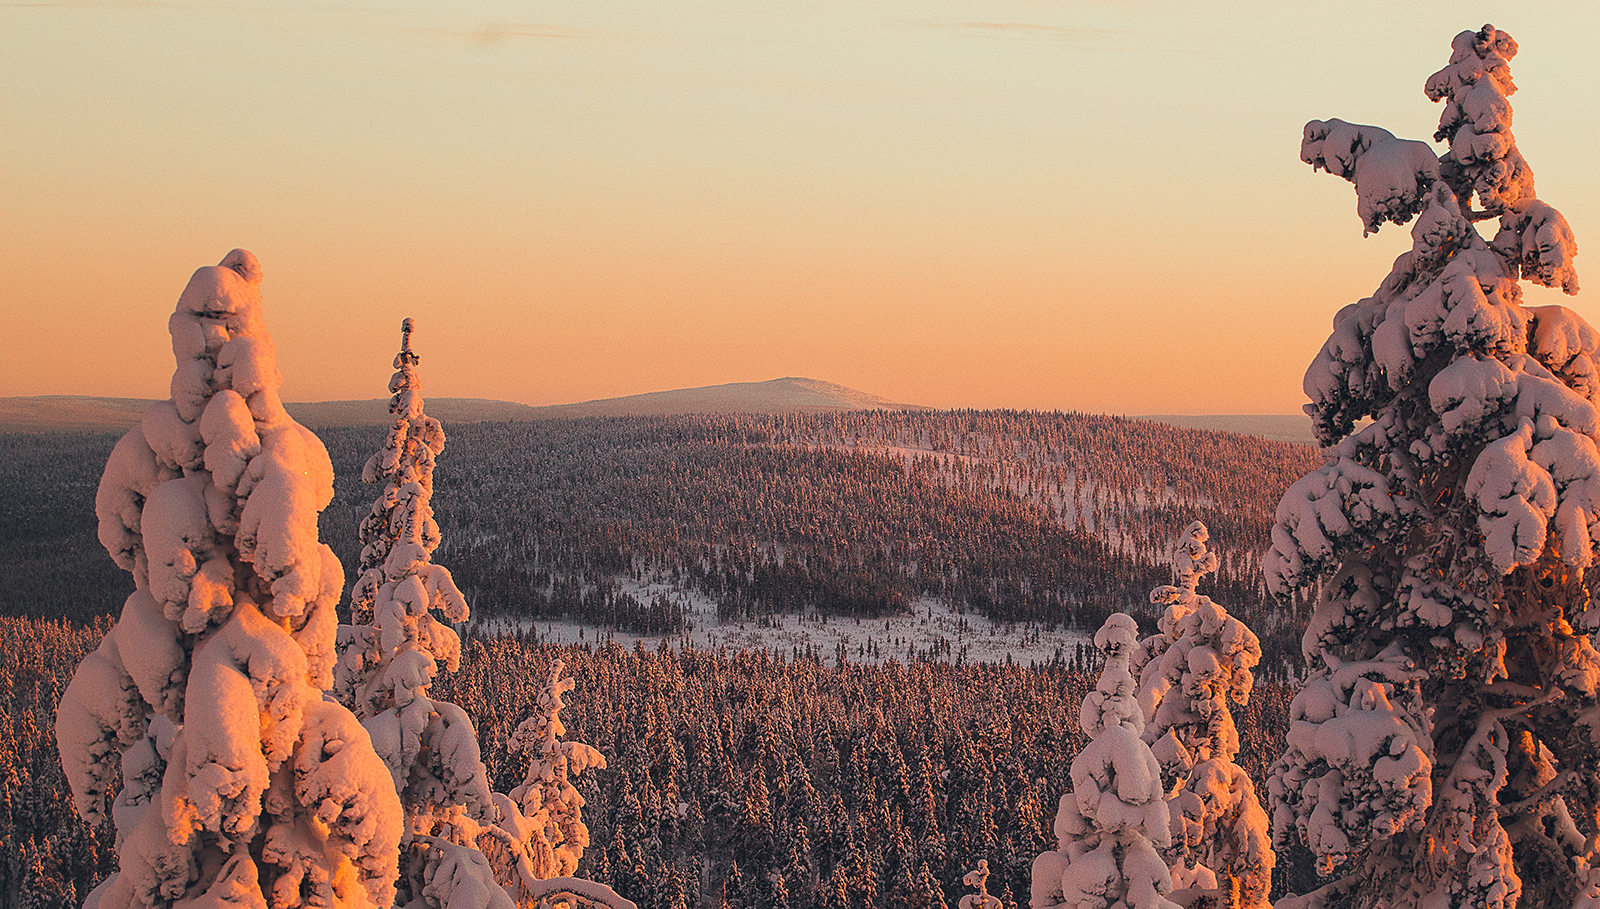 Head Levi in Lapland for superb Finnish skiing | CNN Travel